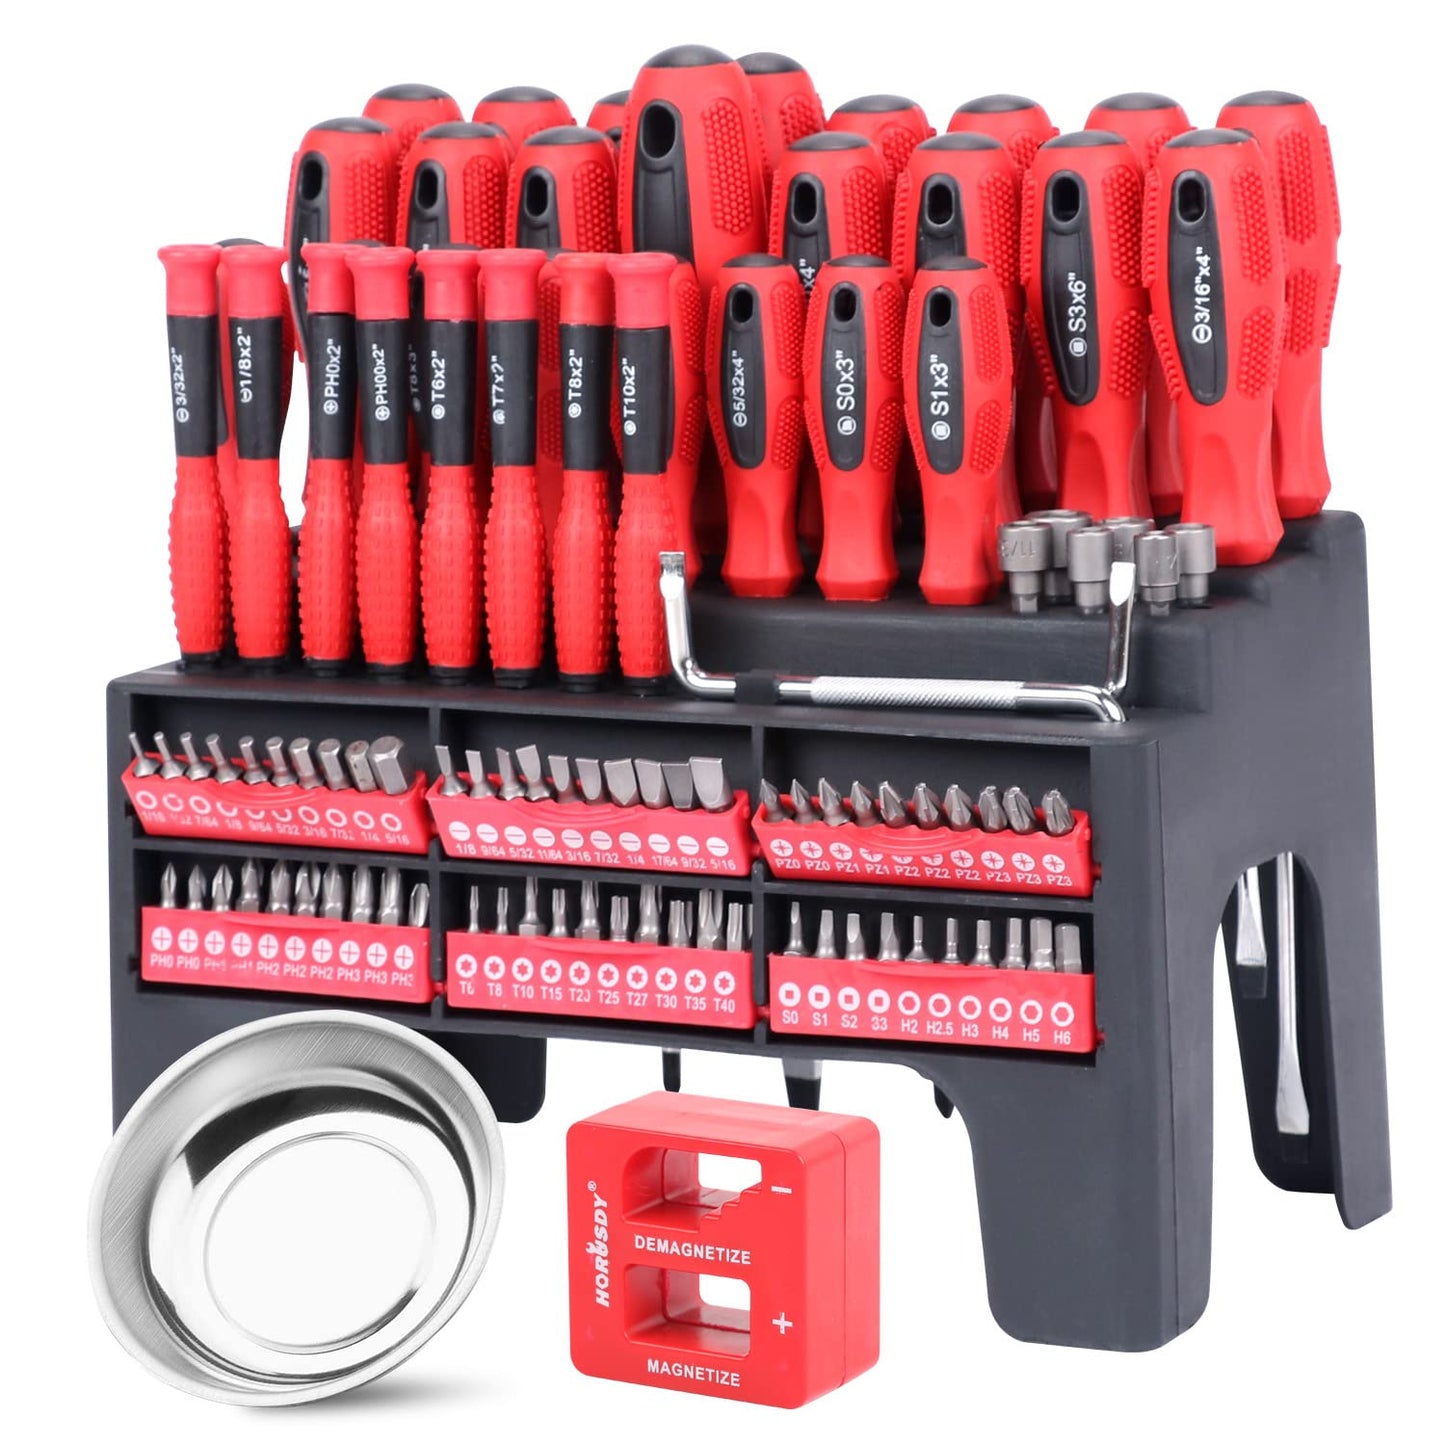 HORUSDY Tools for Men | 102-Piece Magnetic Screwdriver Set with Plastic Racking, Includs Precision screwdriver and Magnetizer Demagnetizer DIY Tools